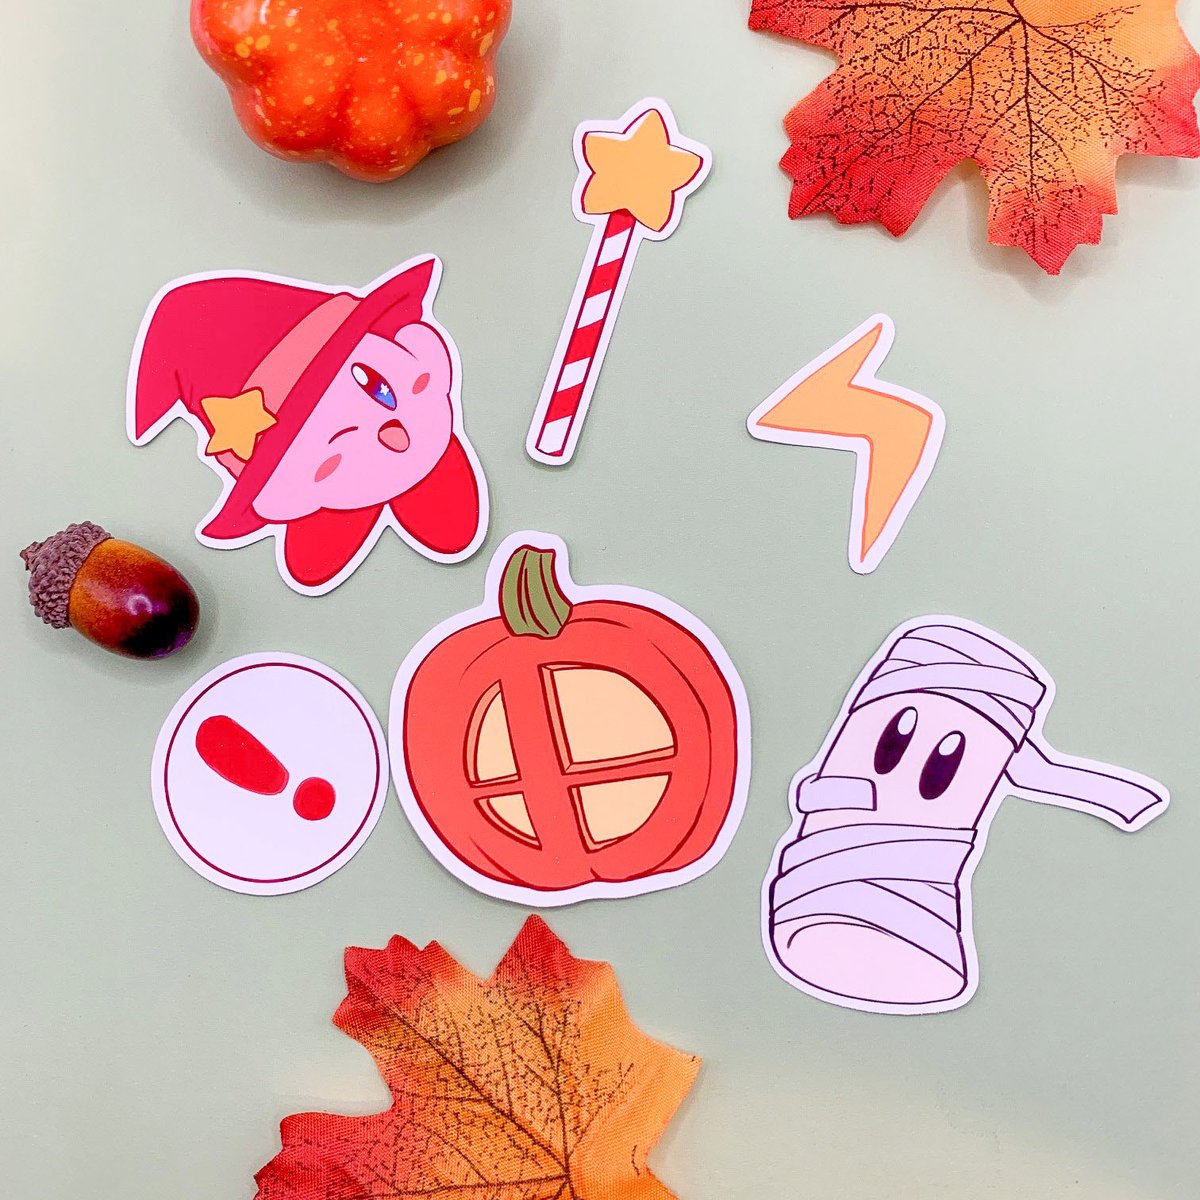 Preview at upcoming Halloween goodies for my store! :)

My store will open TOMORROW, 11am PST! 